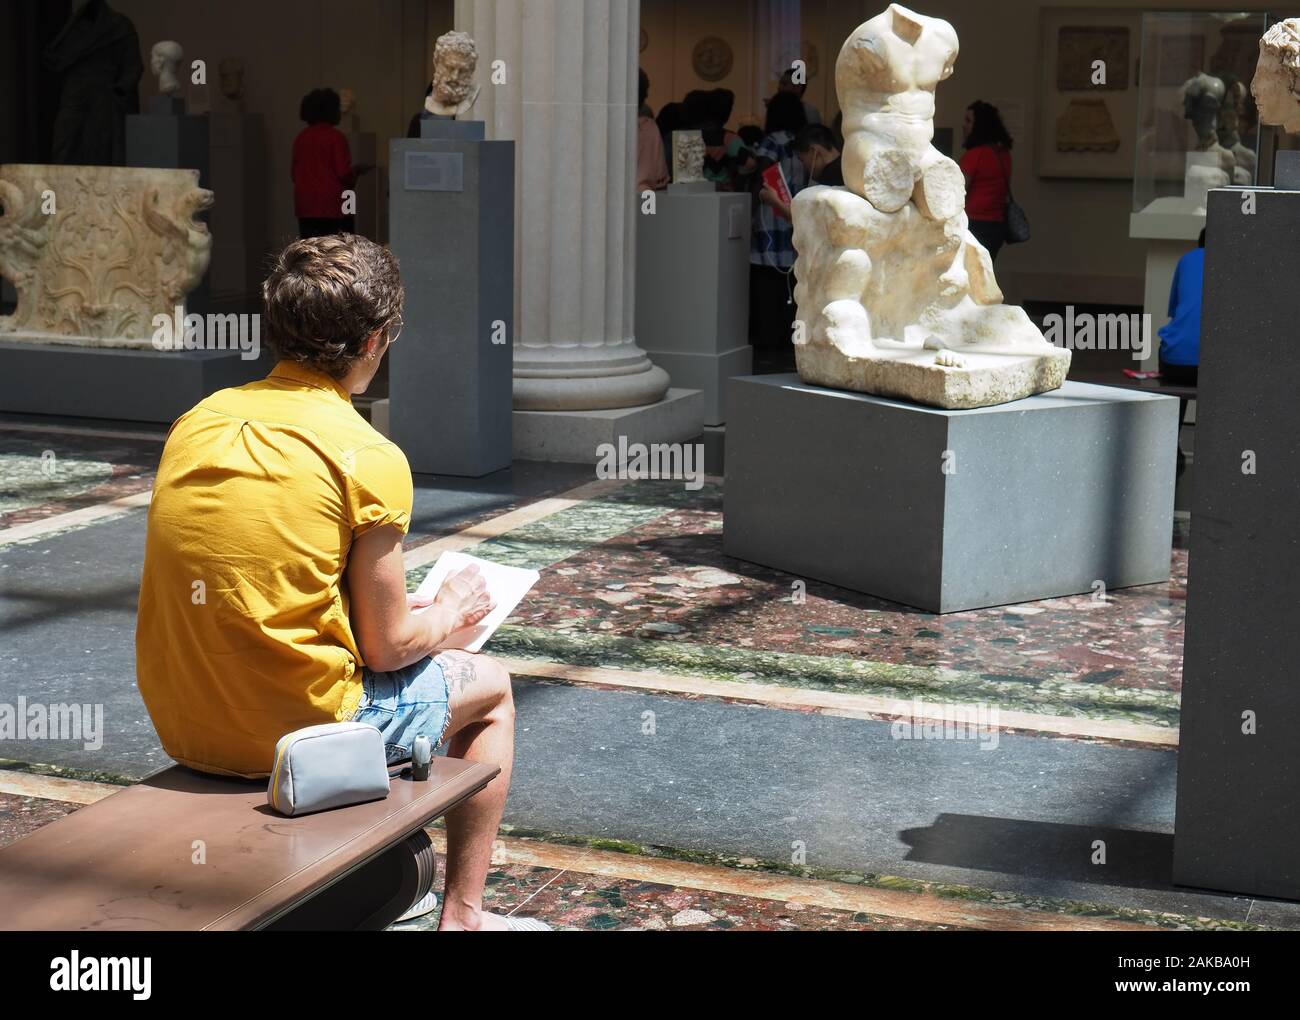 New York City, NY USA. Jul 2017. Visitors inside the Metropolitan Museum of Art enjoying the artwork and other forms of relaxation. Stock Photo